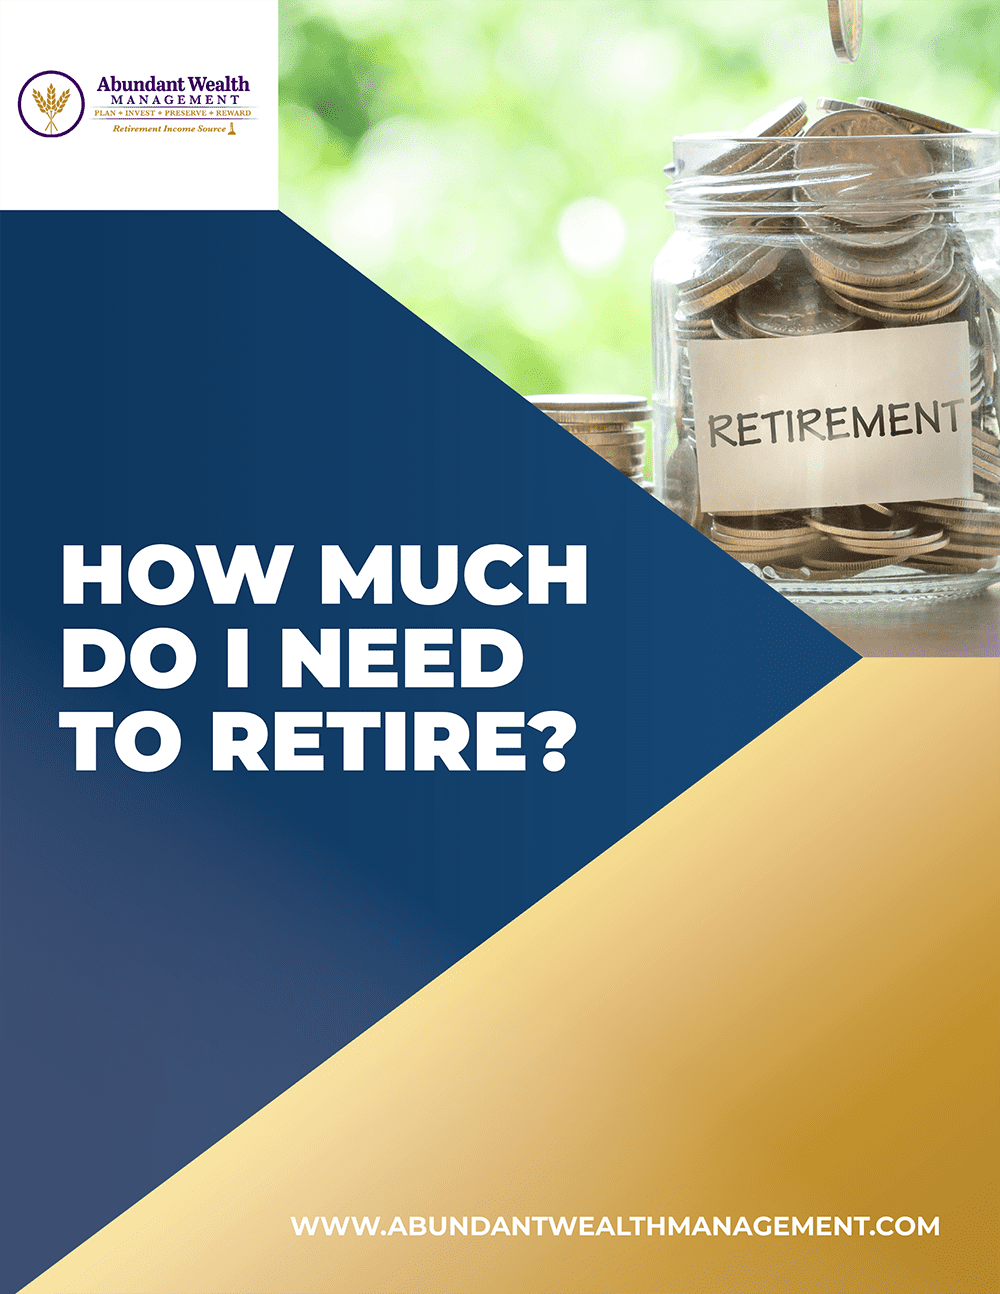 Abundant Wealth Management - How Much Do I Need to Retire-1